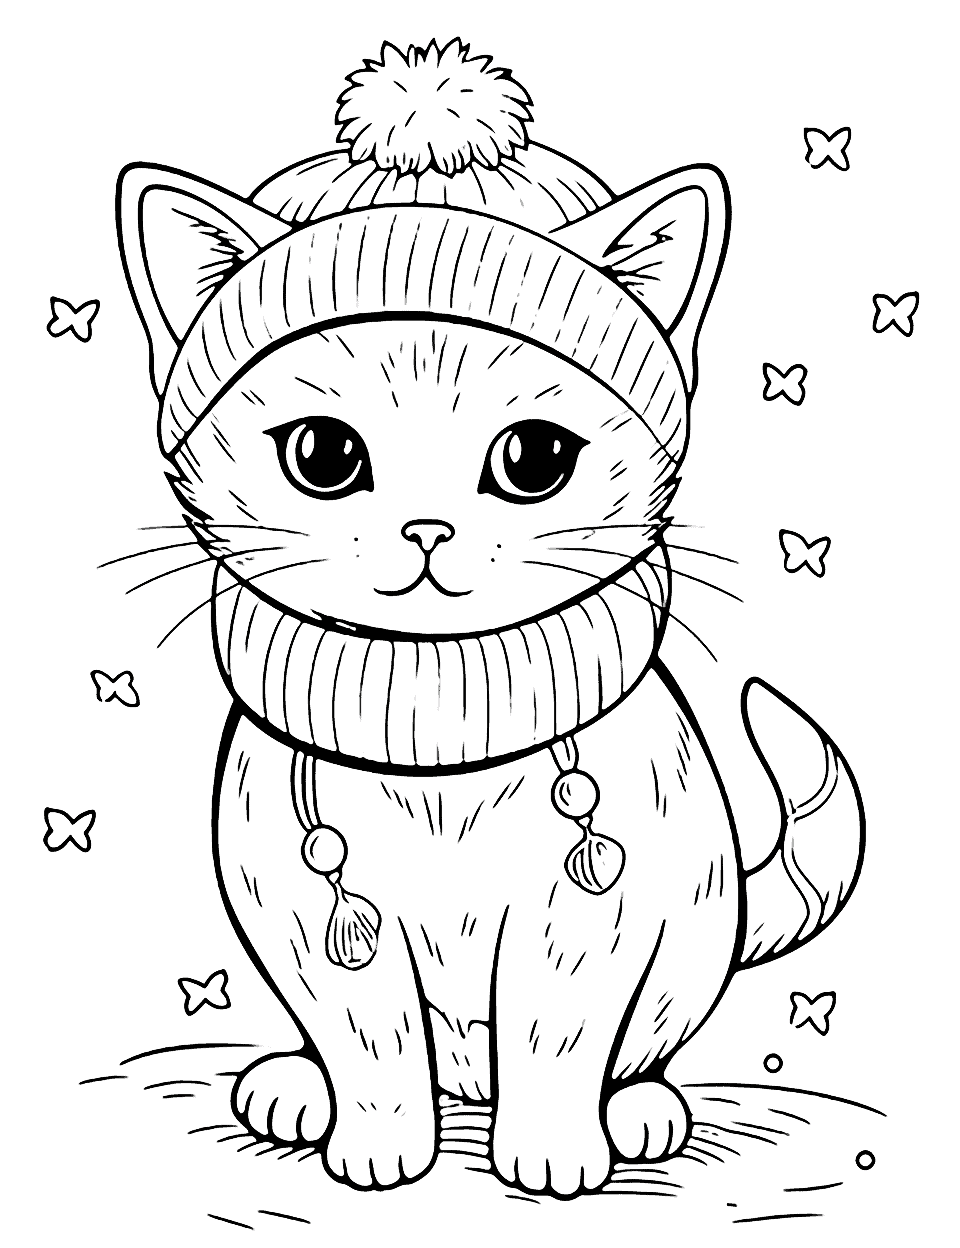 Detailed Winter Cat With a Scarf Coloring Page - A cat wearing a cozy scarf, walking in a winter wonderland with intricate snowflakes.